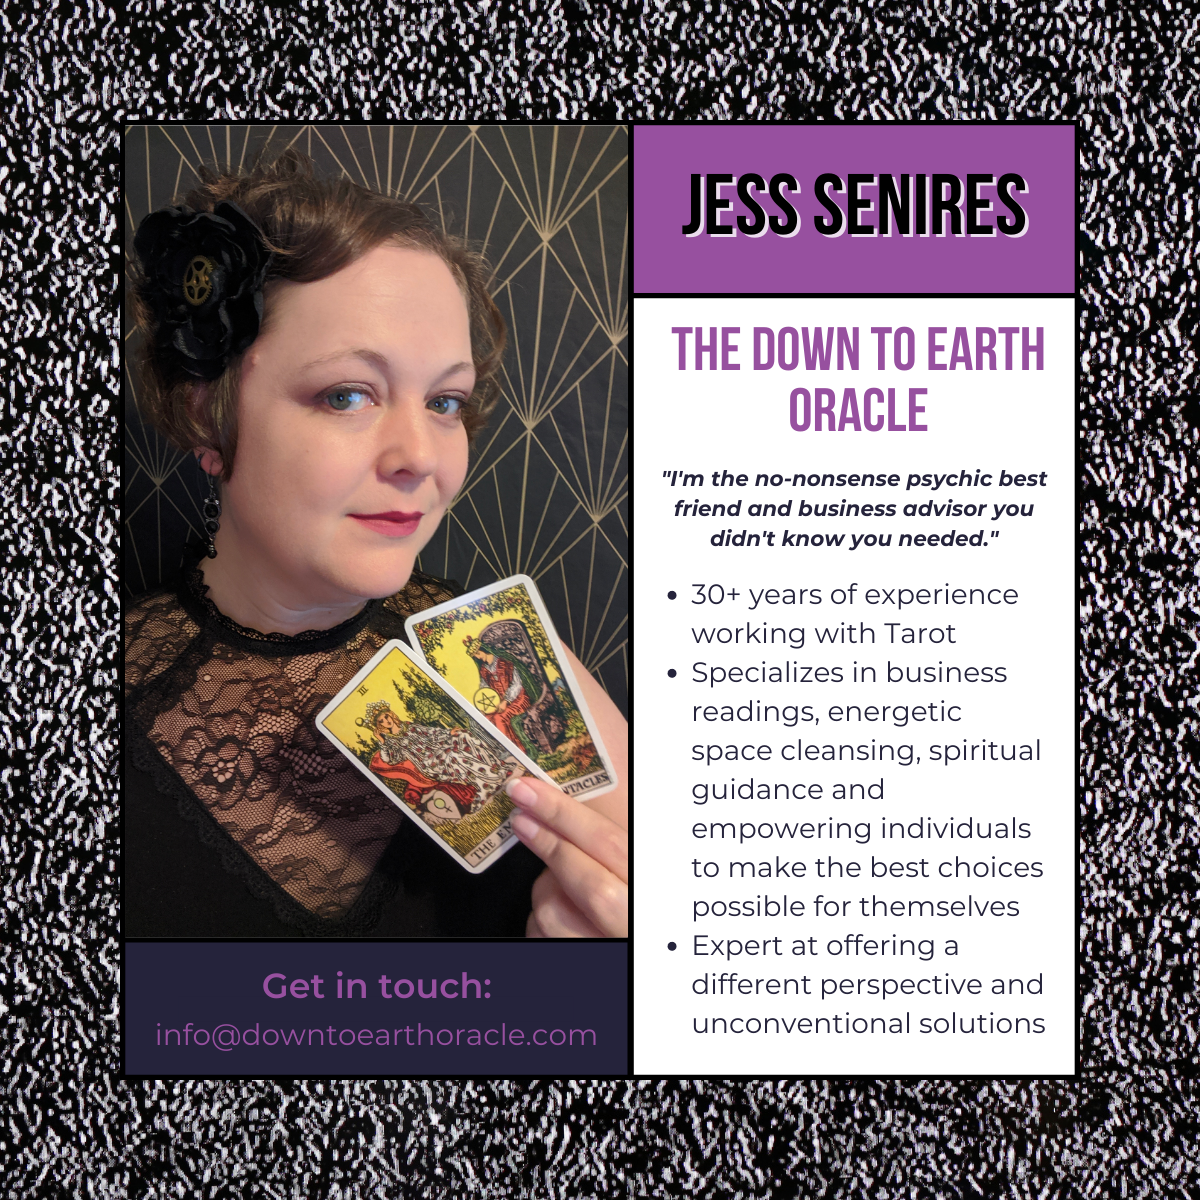 Jess Senires: The Down To Earth Oracle. BIOGRAPHY: "I'm the no-nonsense psychic best friend and business advisor you didn't know you needed." 30+ years of experience working with Tarot Specializes in business readings, energetic space cleansing, spiritual guidance and empowering individuals to make the best choices possible for themselves Expert at offering a different perspective and unconventional solutions.